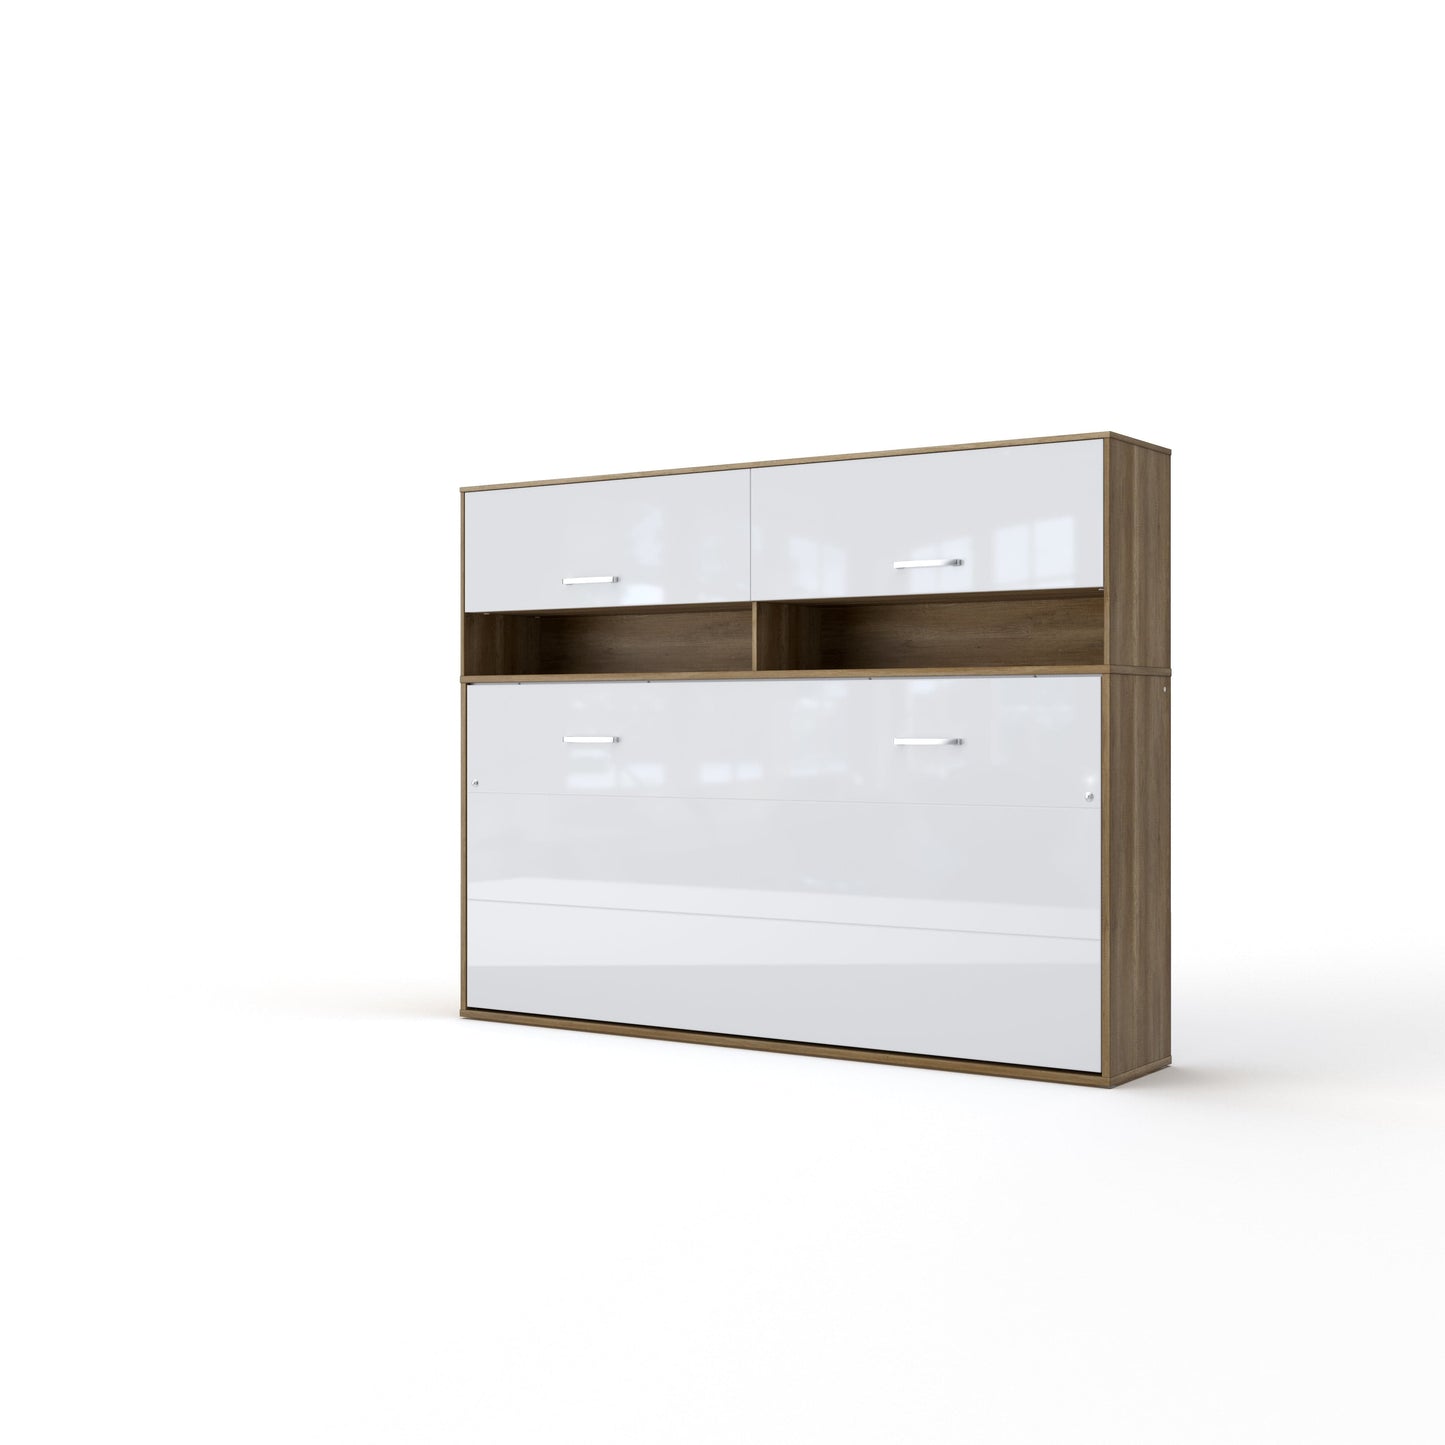 Maxima House Maxima House Invento Horizontal Wall Bed, European Full Size with a cabinet on top Oak Country/White IN120H-11OW